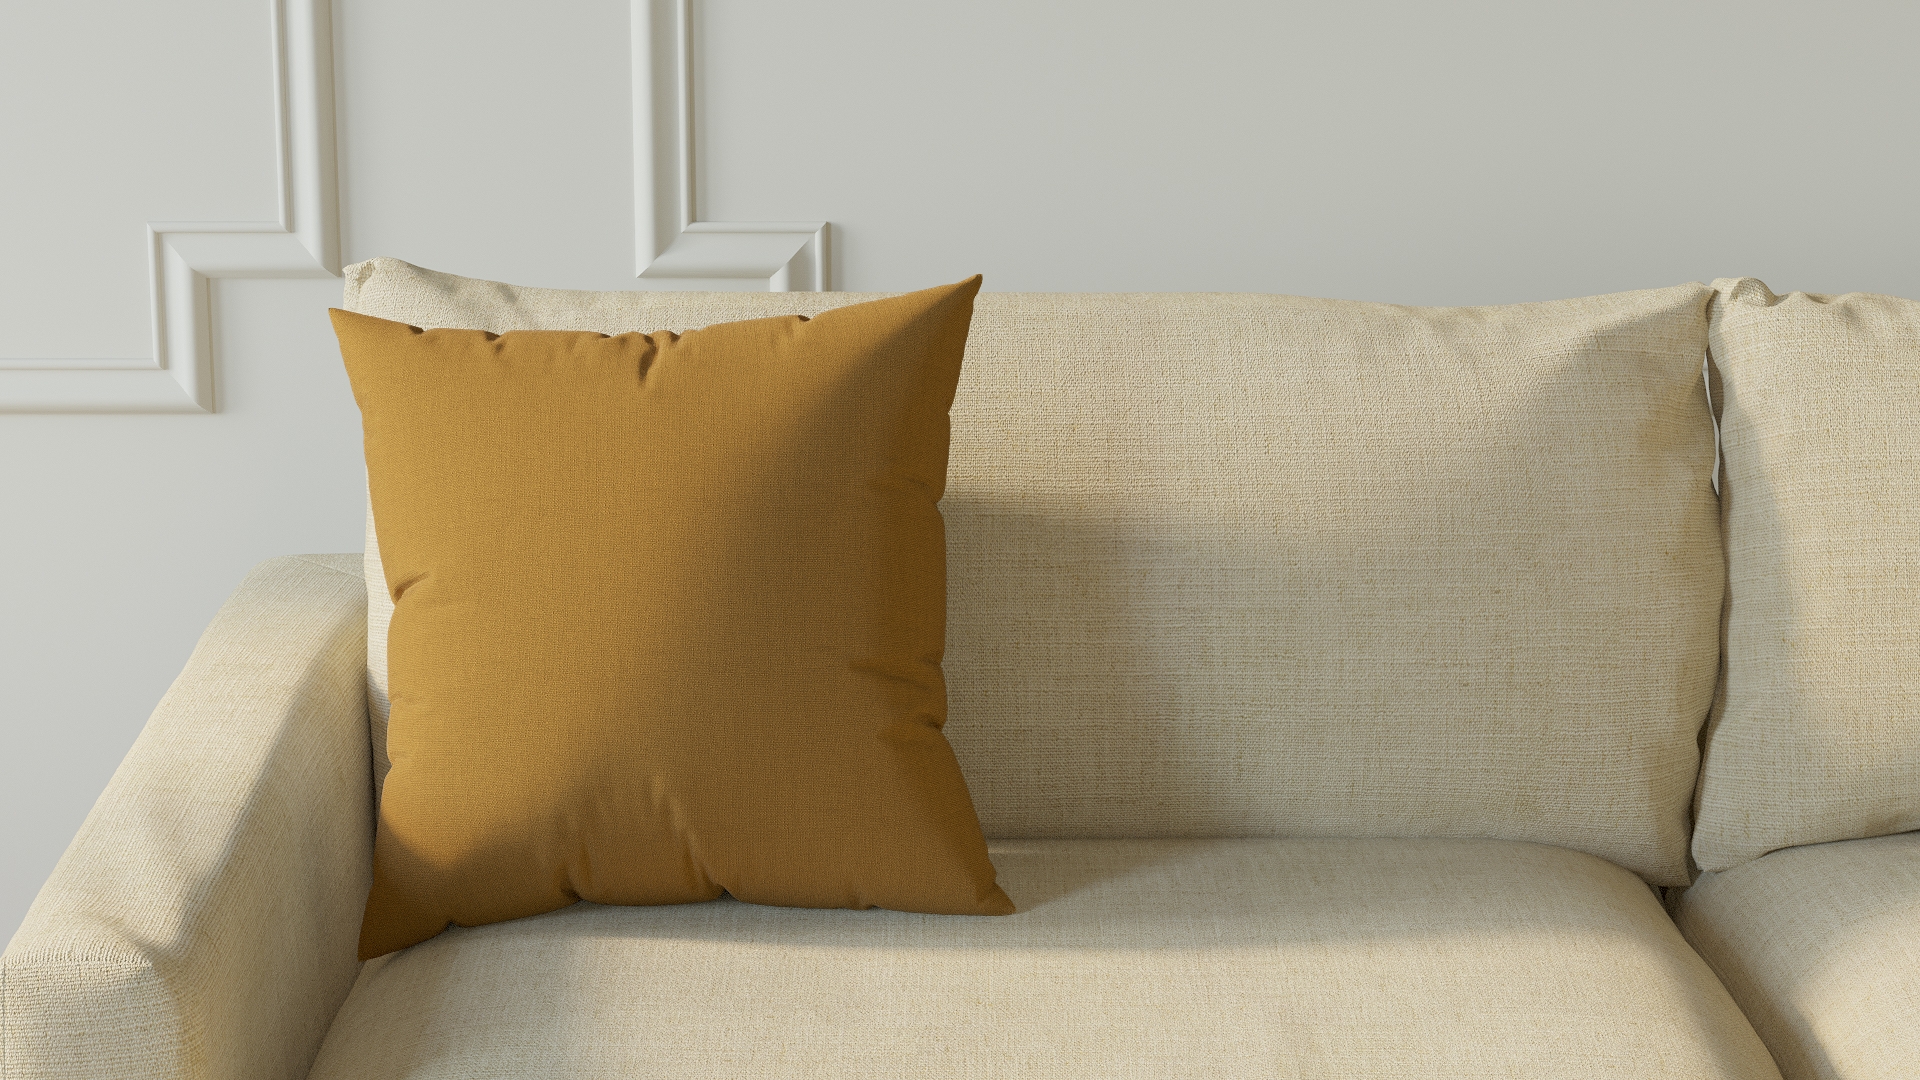 Throw Pillow 18", French Yellow Everyday Linen, 18" x 18" - Image 2